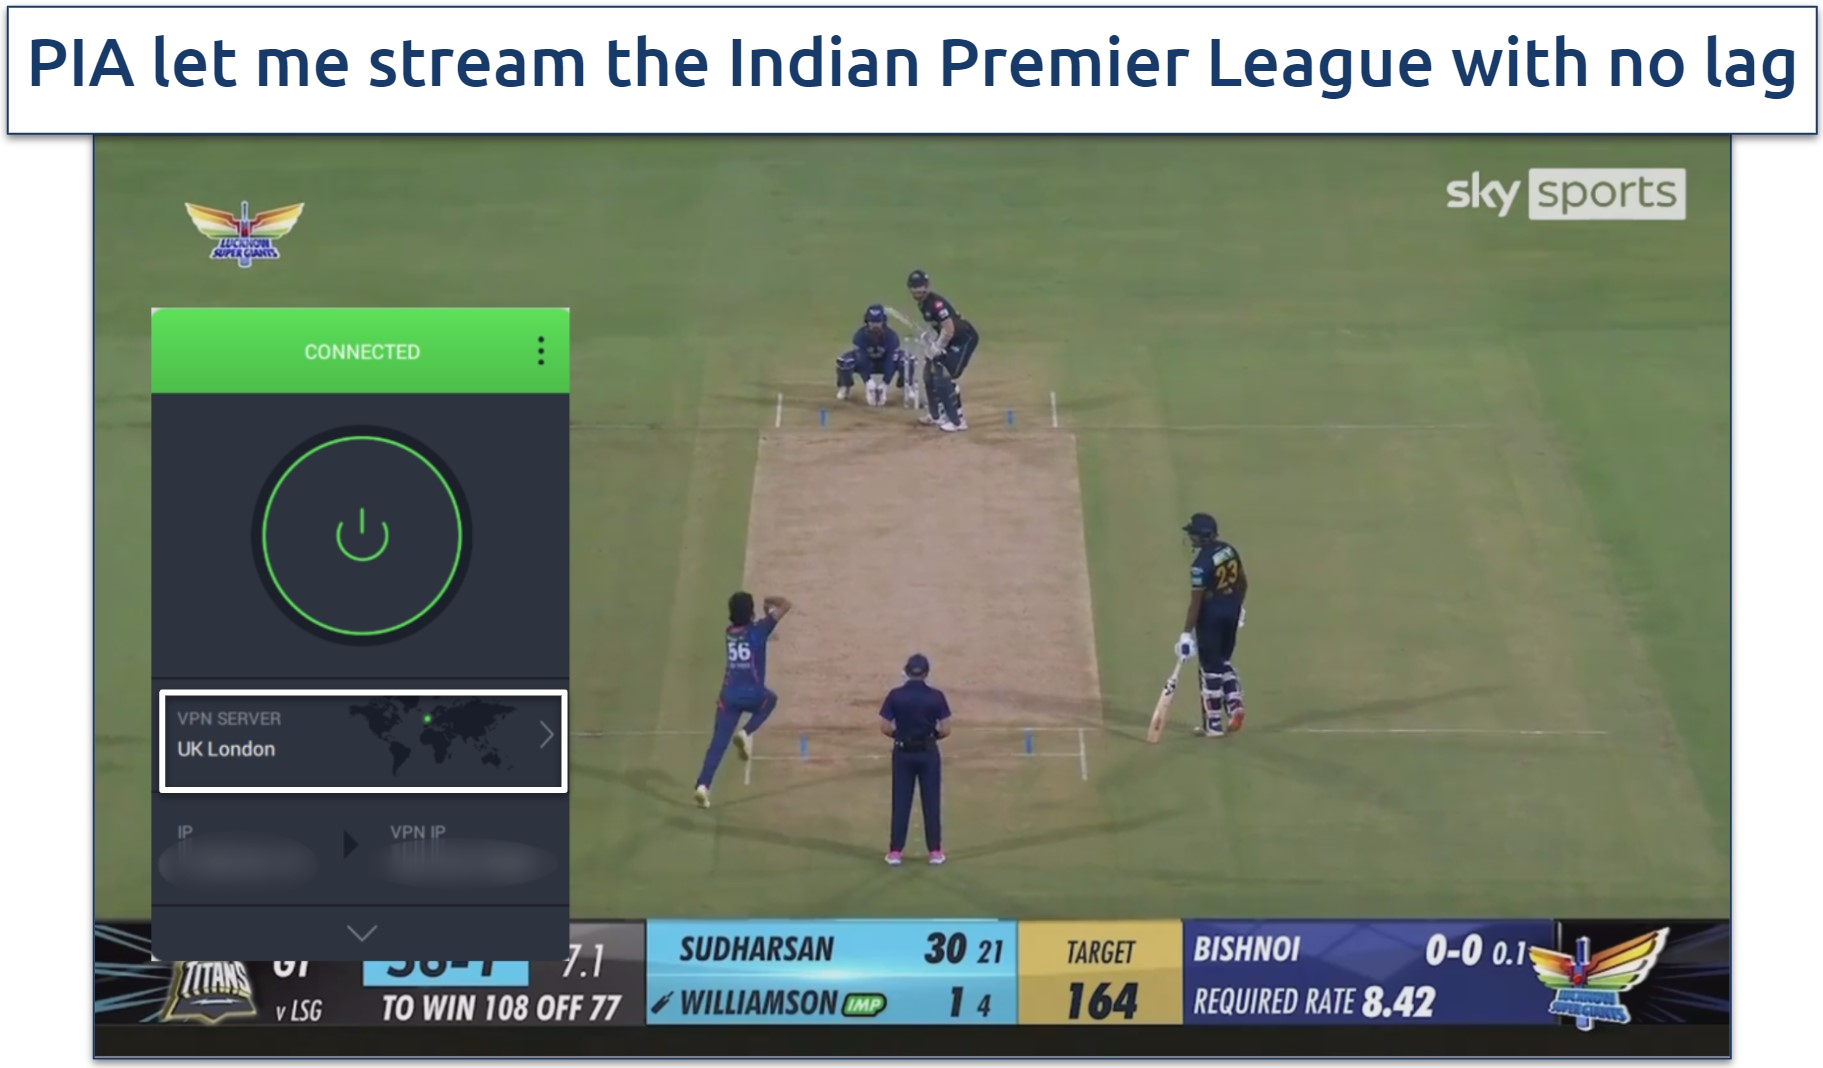 Screenshot of PIA streaming the Indian Premier league cricket match